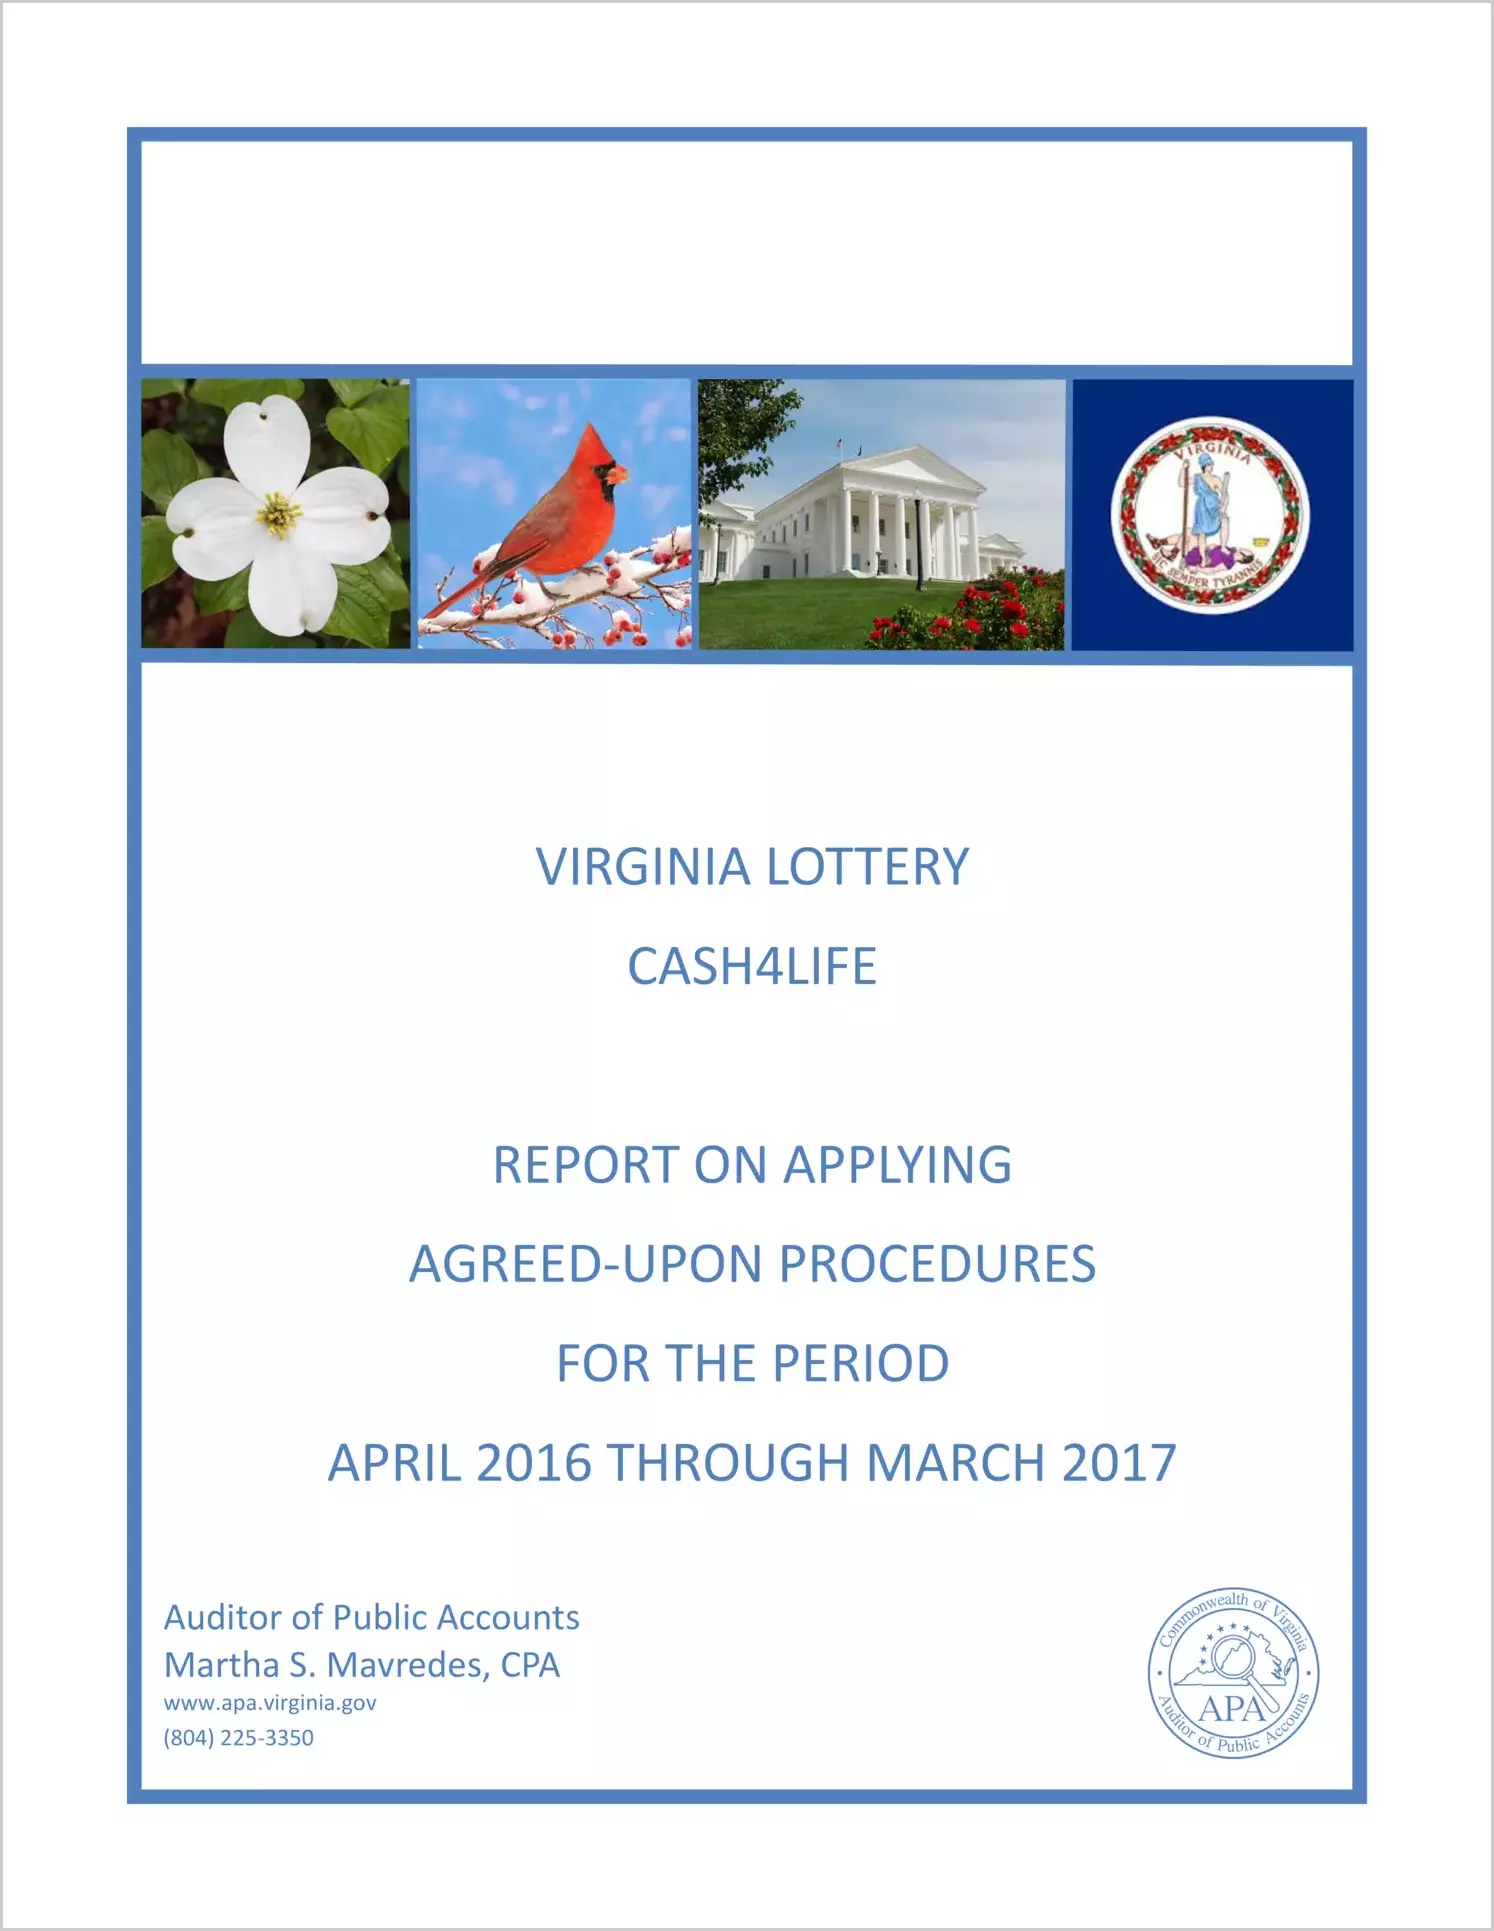 VA Lottery Cash4Life report on Applying Agreed-Upon Procedures for the period April 2016 through March 2017